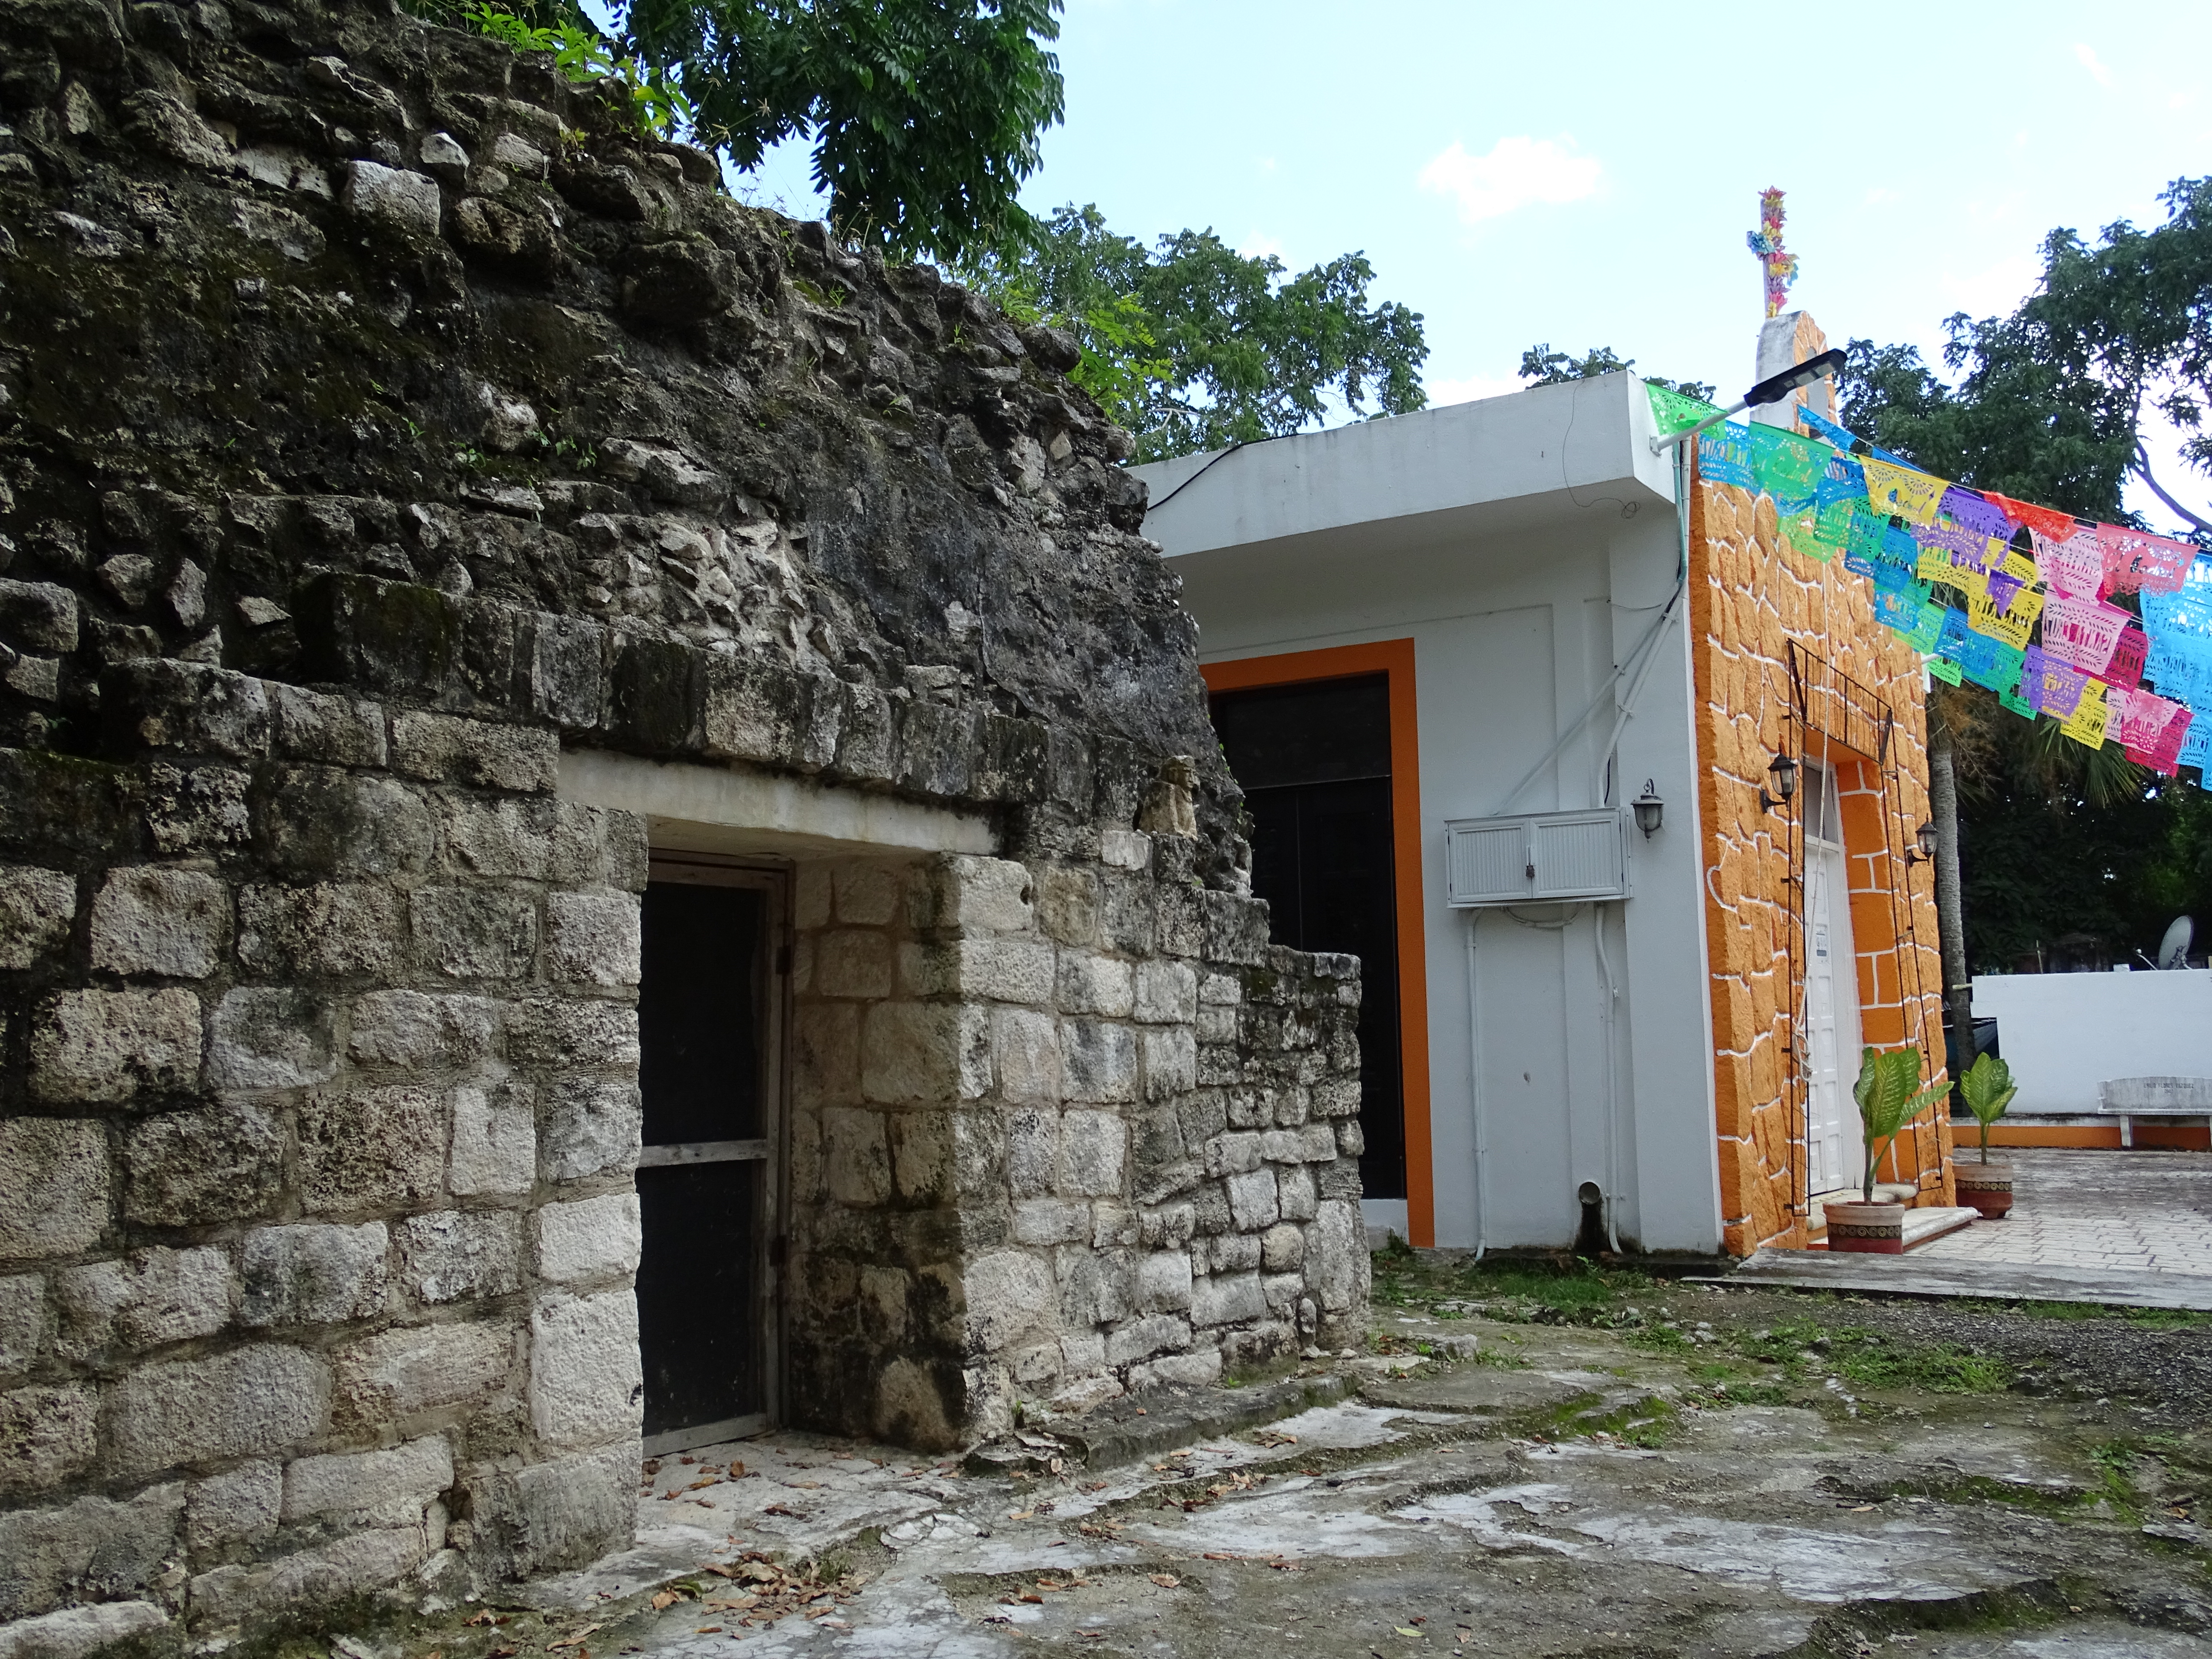 File:Mayan Temple Next to Catholic Church - El Cedral - Cozumel   - Wikimedia Commons